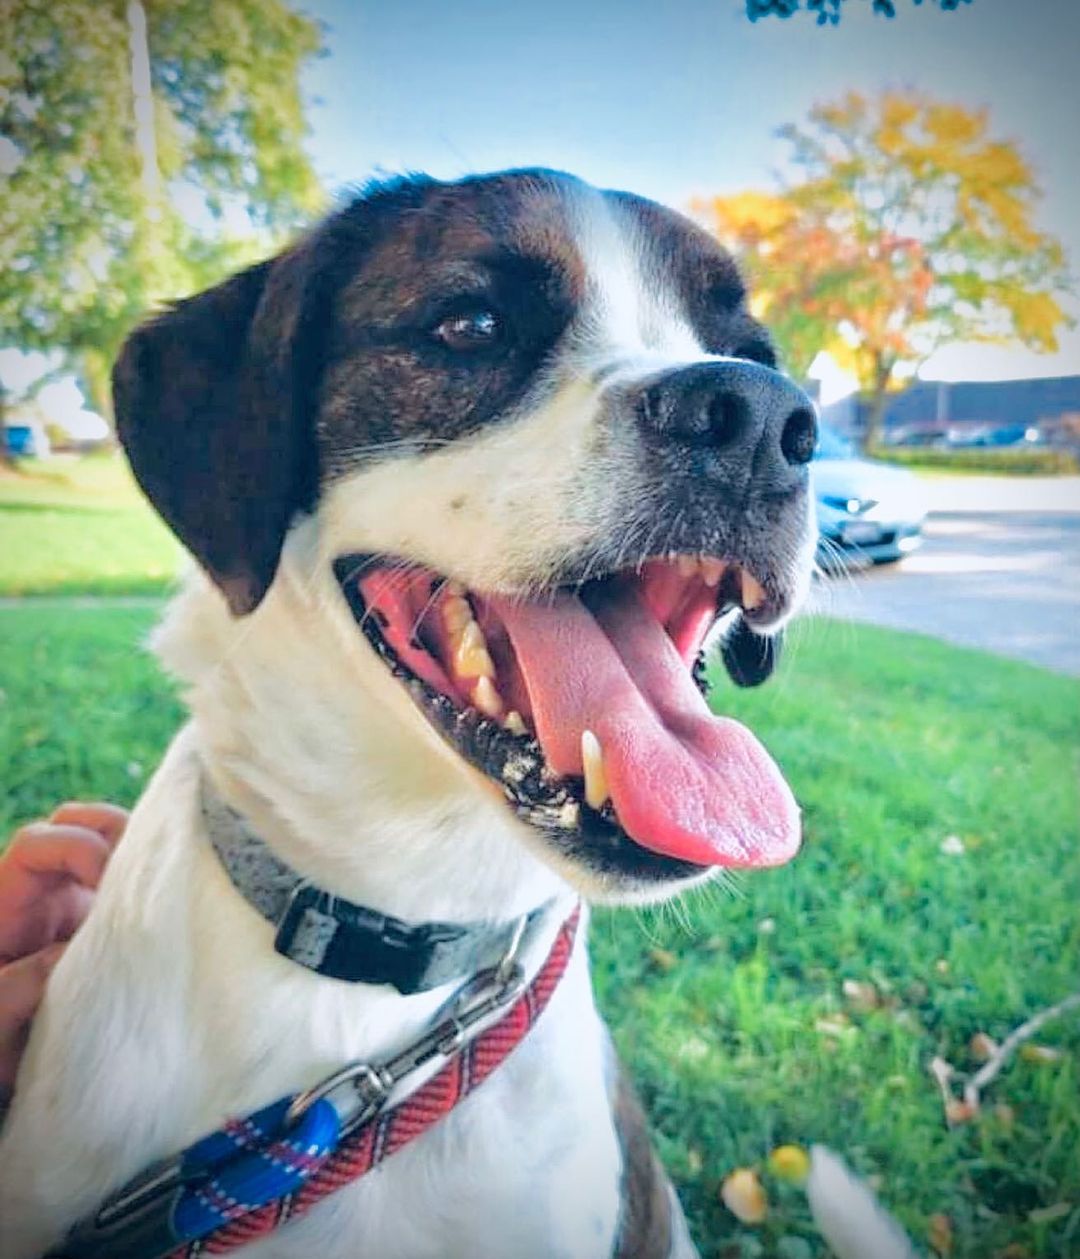 Thunderball is a 2–year-old St. Bernard mix with an underbite that will make you weak in the knees 🥰. He is a sweet, playful, cuddly boy who is waiting for someone to give him a chance at the happy life we keep promising him. He’s about 60 pounds of cuddles and love. We’re looking for an experienced, adult-only home for this guy as he will need continued training and structure (don’t we all? 😋). Apply today at jrspupsnstuff.org DS 270089 
<a target='_blank' href='https://www.instagram.com/explore/tags/jrsdogsofinstagram/'>#jrsdogsofinstagram</a> <a target='_blank' href='https://www.instagram.com/explore/tags/jrspupsnstuff/'>#jrspupsnstuff</a> <a target='_blank' href='https://www.instagram.com/explore/tags/rescuedogsofinstagram/'>#rescuedogsofinstagram</a> <a target='_blank' href='https://www.instagram.com/explore/tags/jrspups/'>#jrspups</a> <a target='_blank' href='https://www.instagram.com/explore/tags/rescuedog/'>#rescuedog</a> <a target='_blank' href='https://www.instagram.com/explore/tags/rescue/'>#rescue</a> <a target='_blank' href='https://www.instagram.com/explore/tags/foster/'>#foster</a> <a target='_blank' href='https://www.instagram.com/explore/tags/adopt/'>#adopt</a> <a target='_blank' href='https://www.instagram.com/explore/tags/fosteringsaveslives/'>#fosteringsaveslives</a> <a target='_blank' href='https://www.instagram.com/explore/tags/fosterdog/'>#fosterdog</a> <a target='_blank' href='https://www.instagram.com/explore/tags/adoptdontshop/'>#adoptdontshop</a>